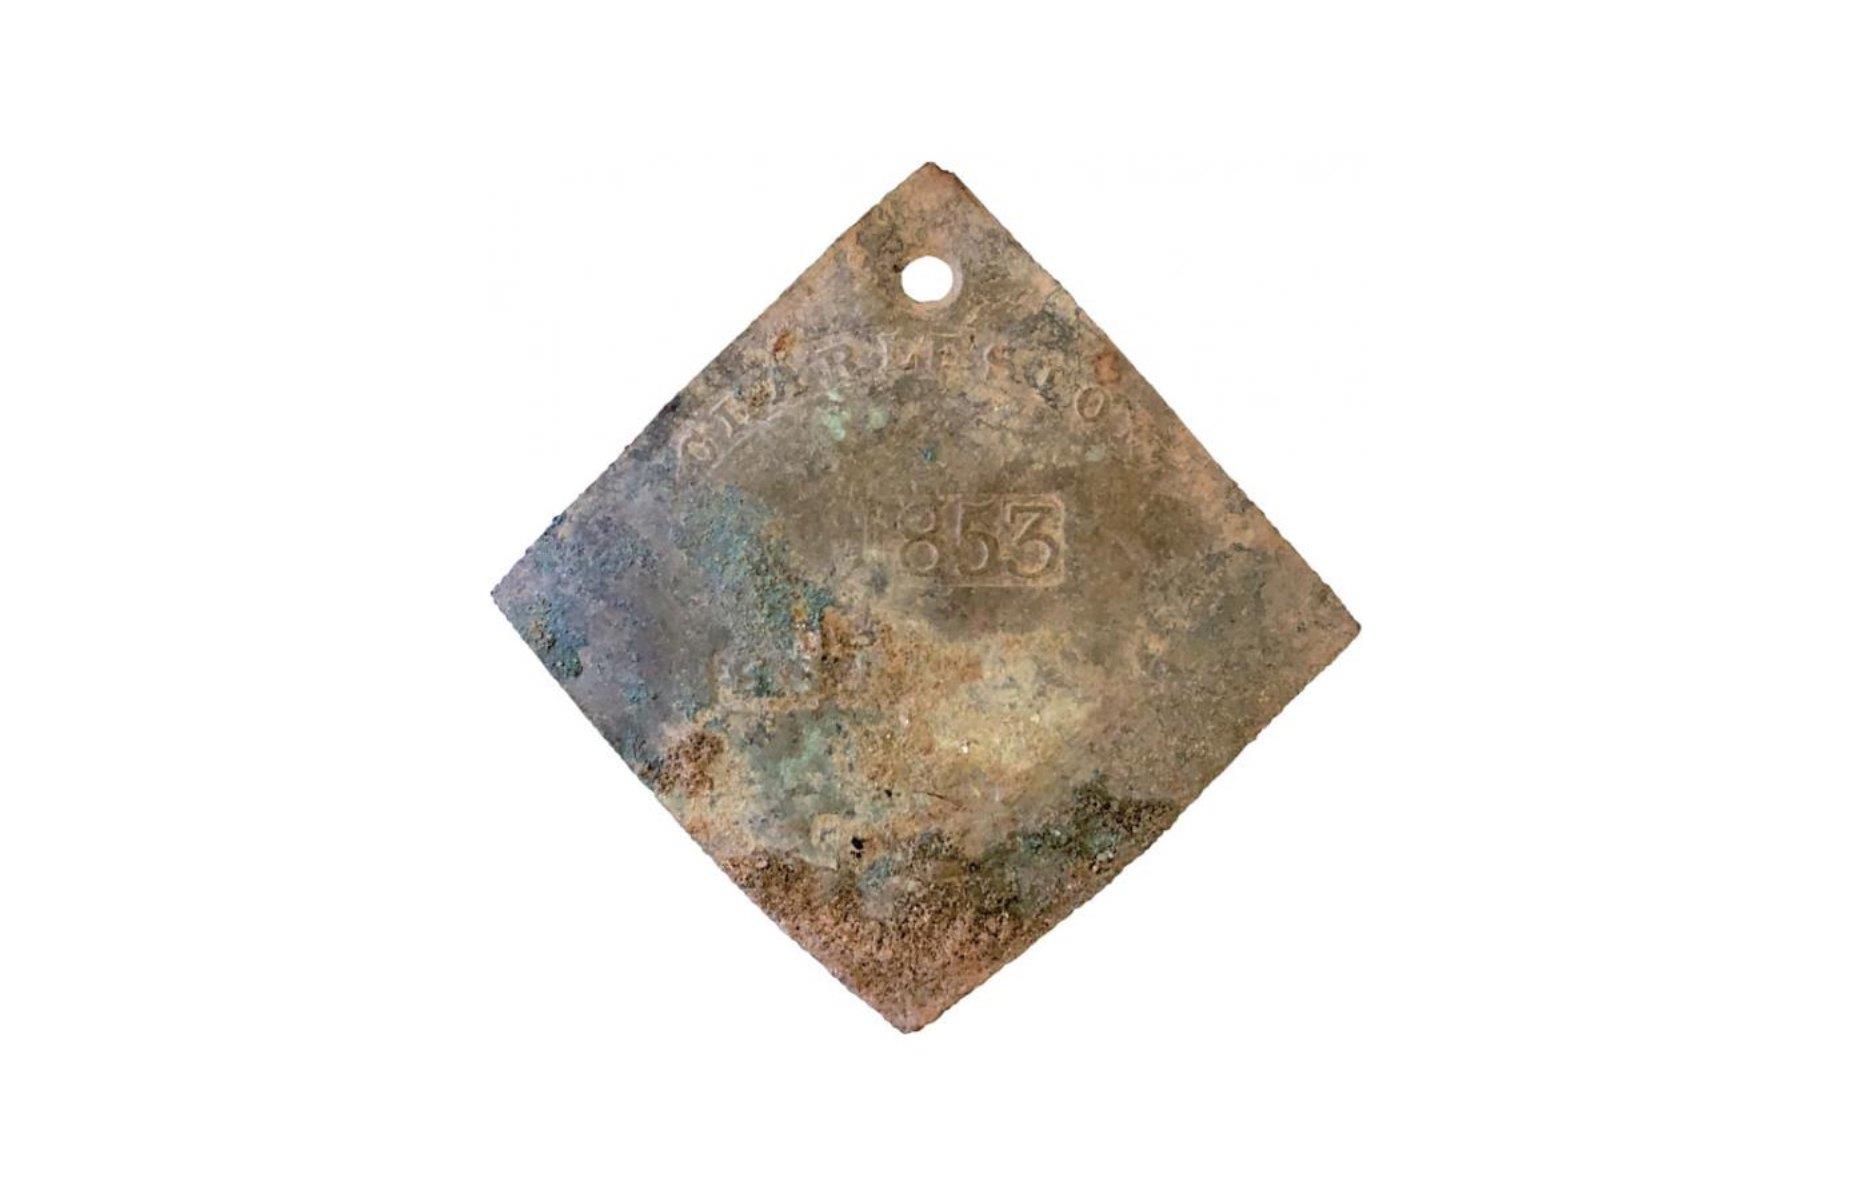 <p>Evidence of South Carolina’s slaveholding past was unearthed when students from the College of Charleston helped to excavate part of their campus ahead of rebuilding works in 2021. They found a copper slave tag labeled '1853' – these tags were used to prove that an enslaved person was authorized to work for someone else besides their owner. </p>  <p>Most likely the tag was worn by an enslaved person who was hired out to work in a kitchen that existed on the site in the mid-19th century.</p>